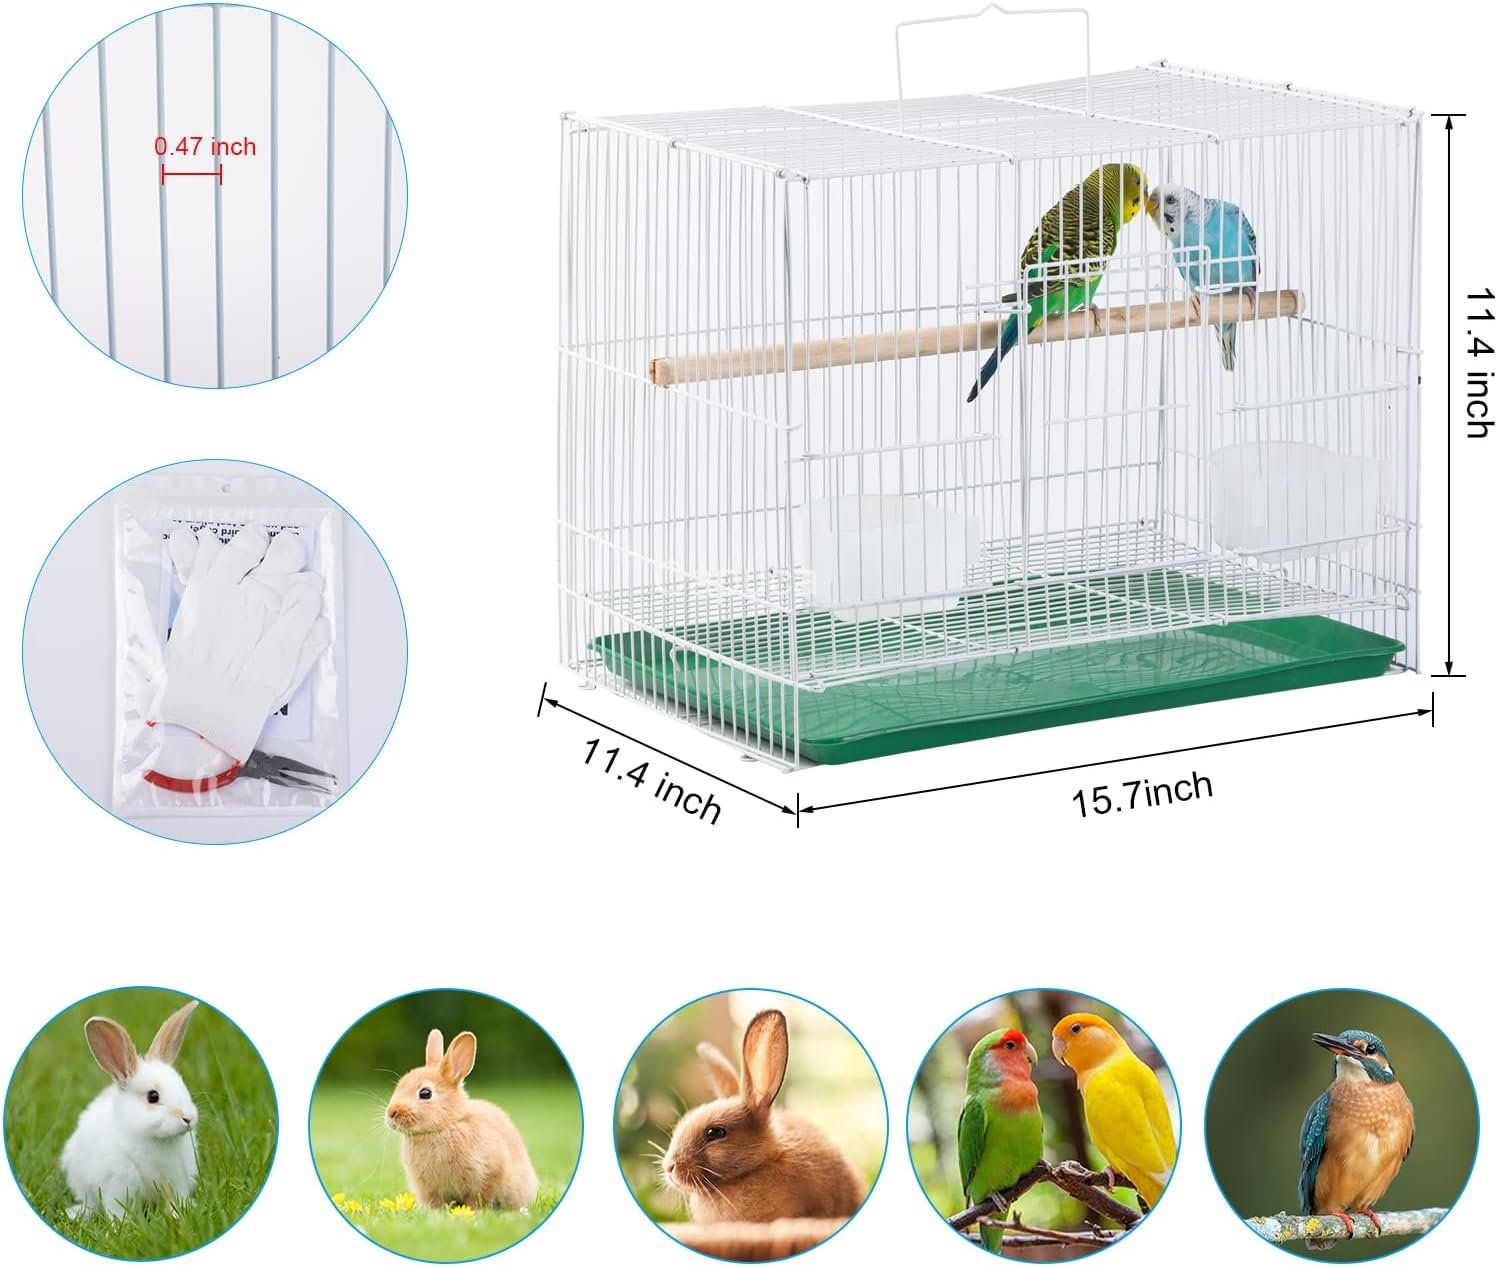 Kuzino Small Bird Travel Cage - Economy and Lightweight Small Birds Carrier Cages for Parakeets Lovebirds Parrotlets Finches Canaries with White Wire, White Plastic Base with Removable Tray